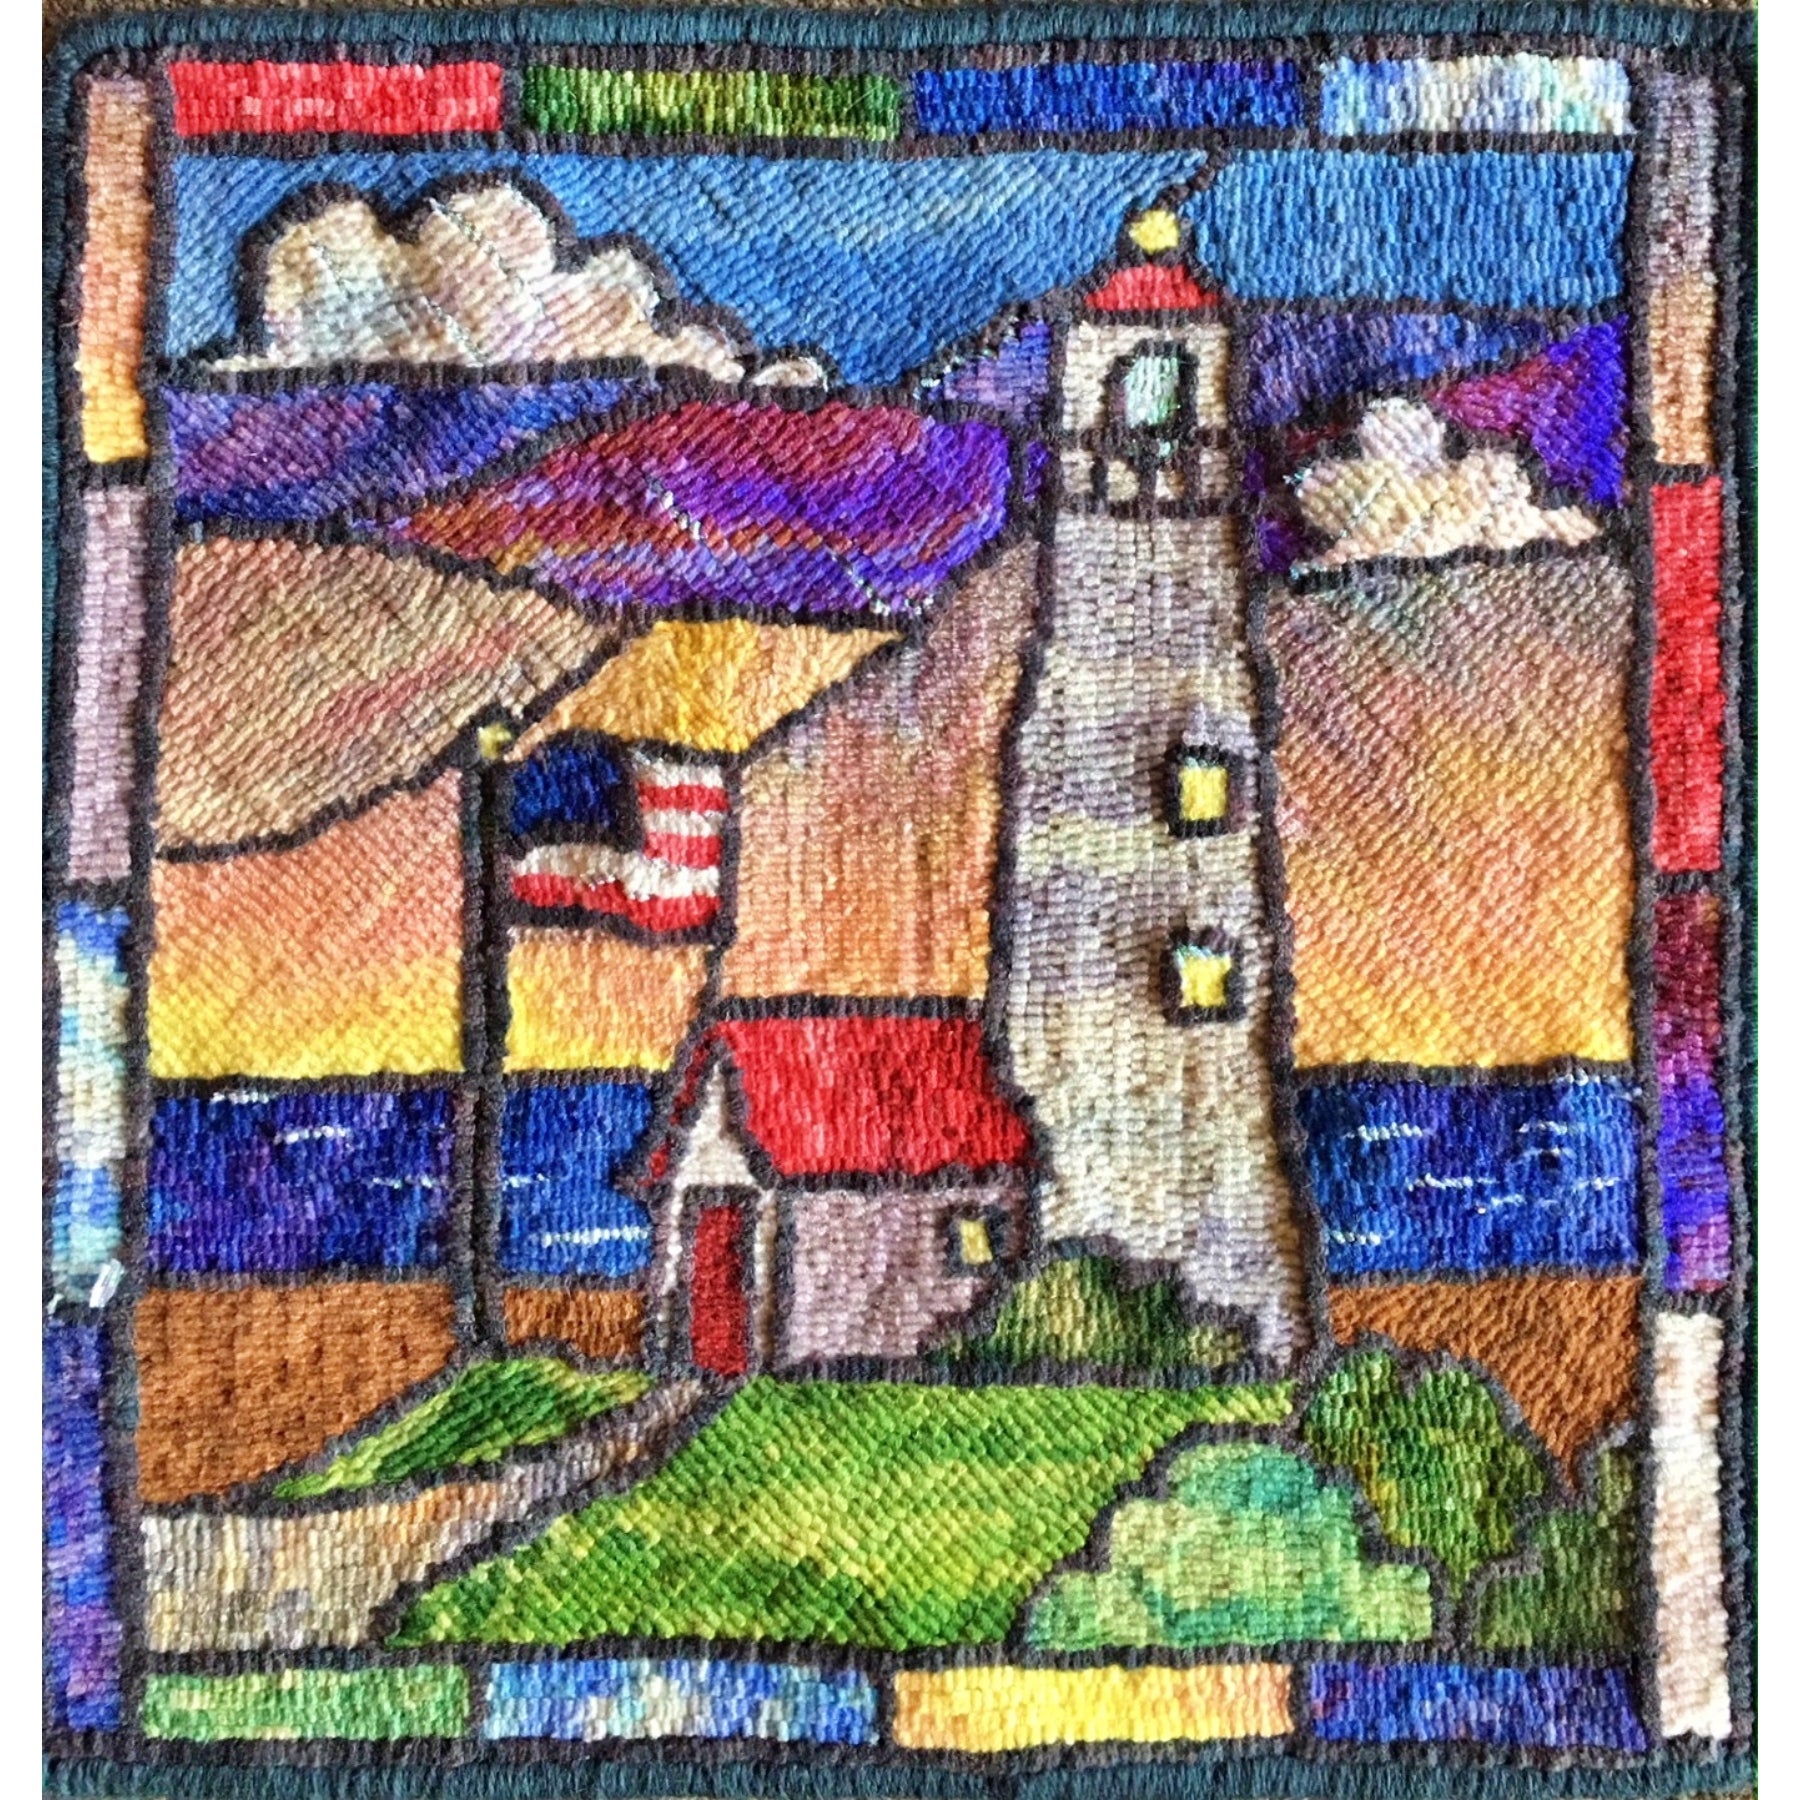 Stained Glass Lighthouse, rug hooked by Valerie Begeman